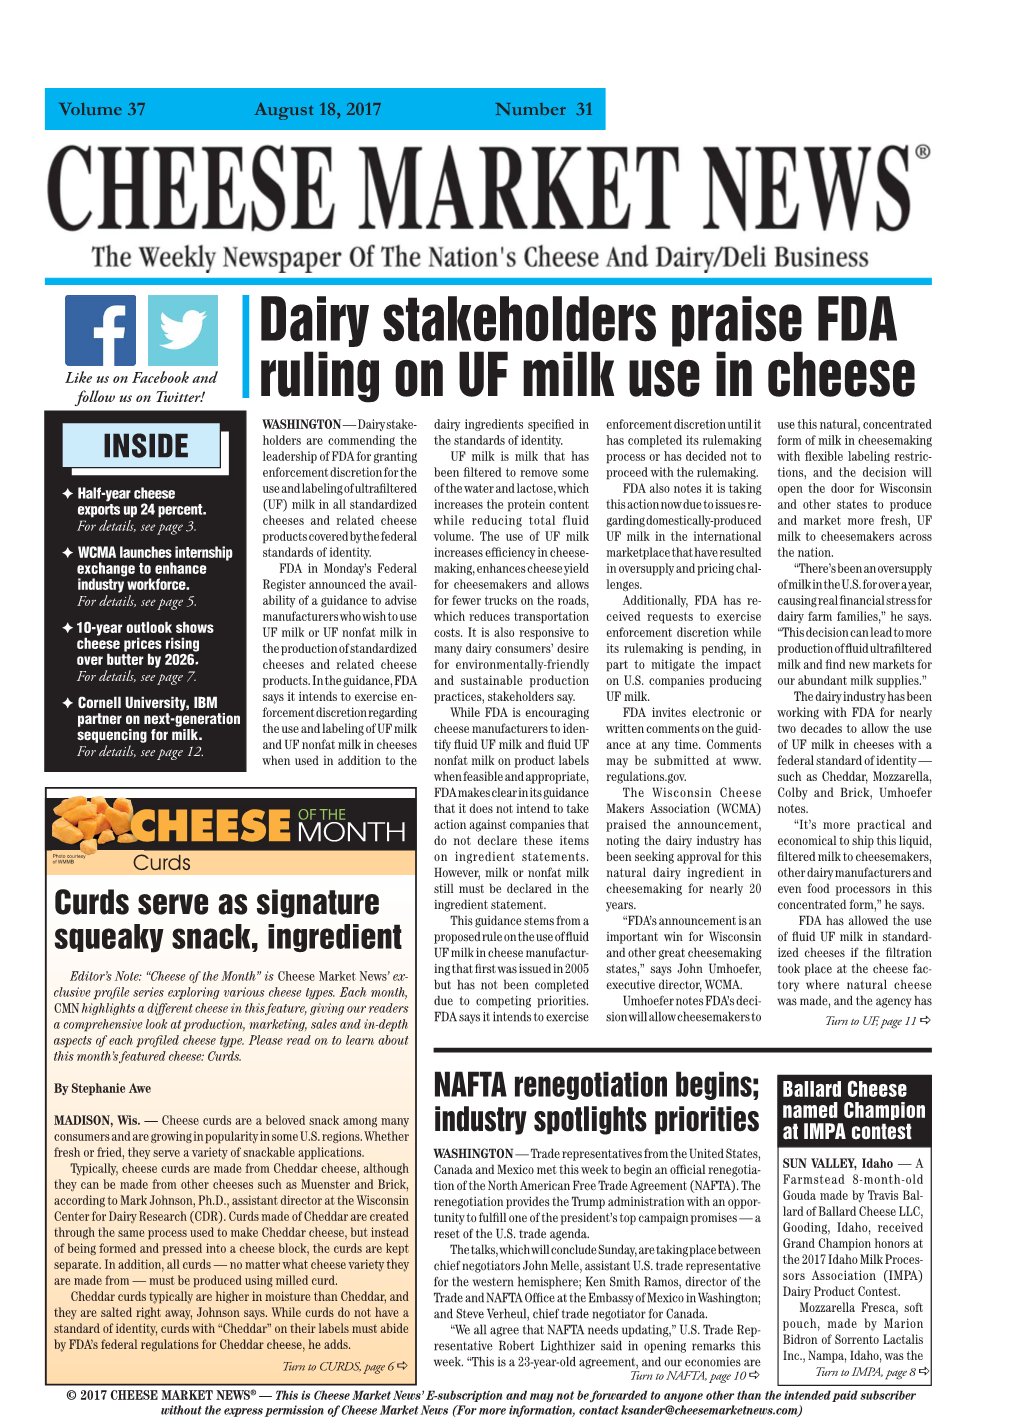 Dairy Stakeholders Praise FDA Ruling on UF Milk Use in Cheese